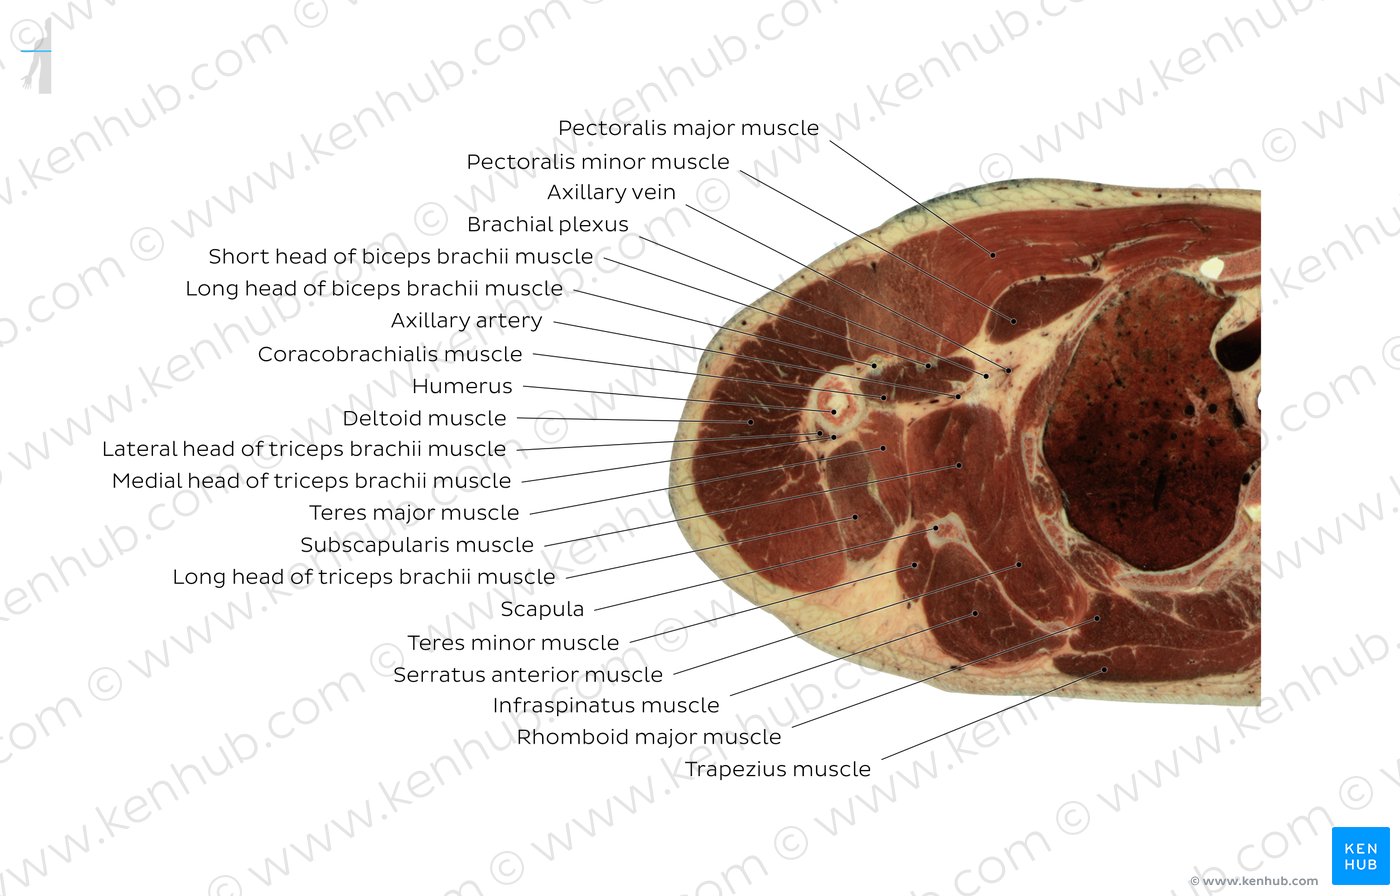 Coracobrachialis muscle level: Overview